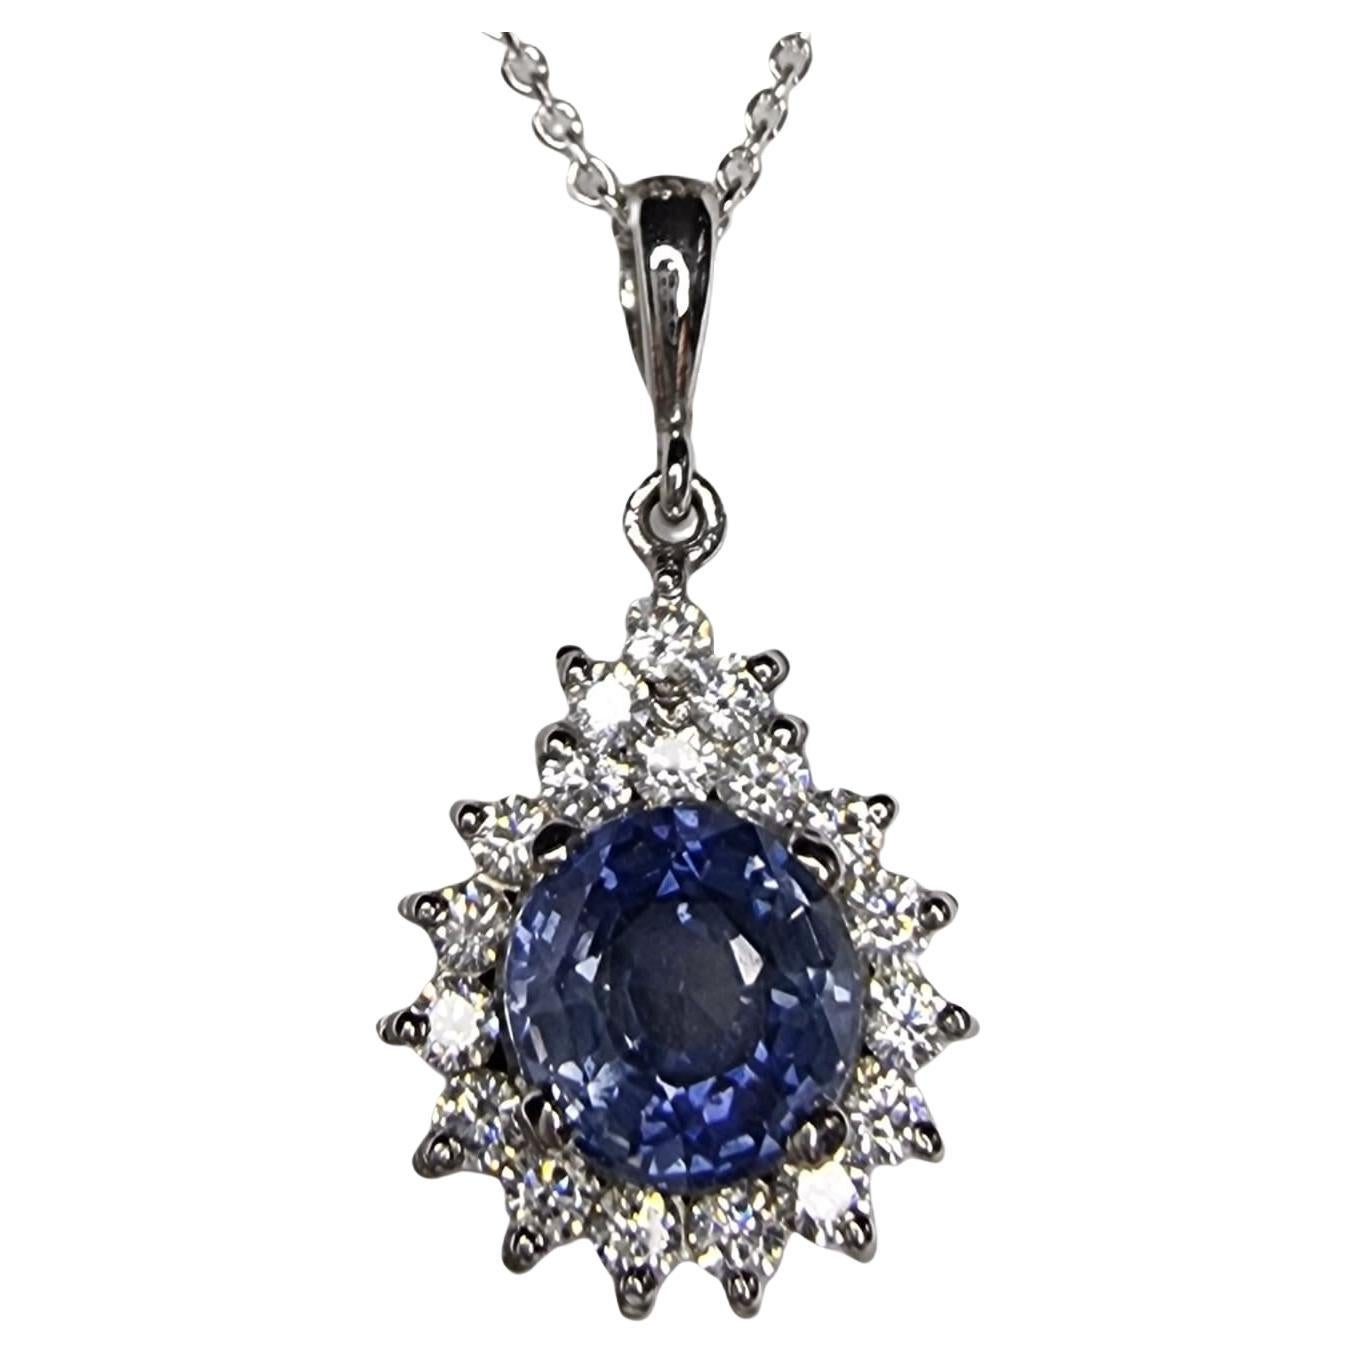 Introducing our captivating 3ct Natural Origin Blue Round Cut Sapphire Arch crown Pendant – a true embodiment of grace and sophistication. At the heart of this pendant lies a magnificent 1x7.2x6.8mm round natural origin blue sapphire, radiating an